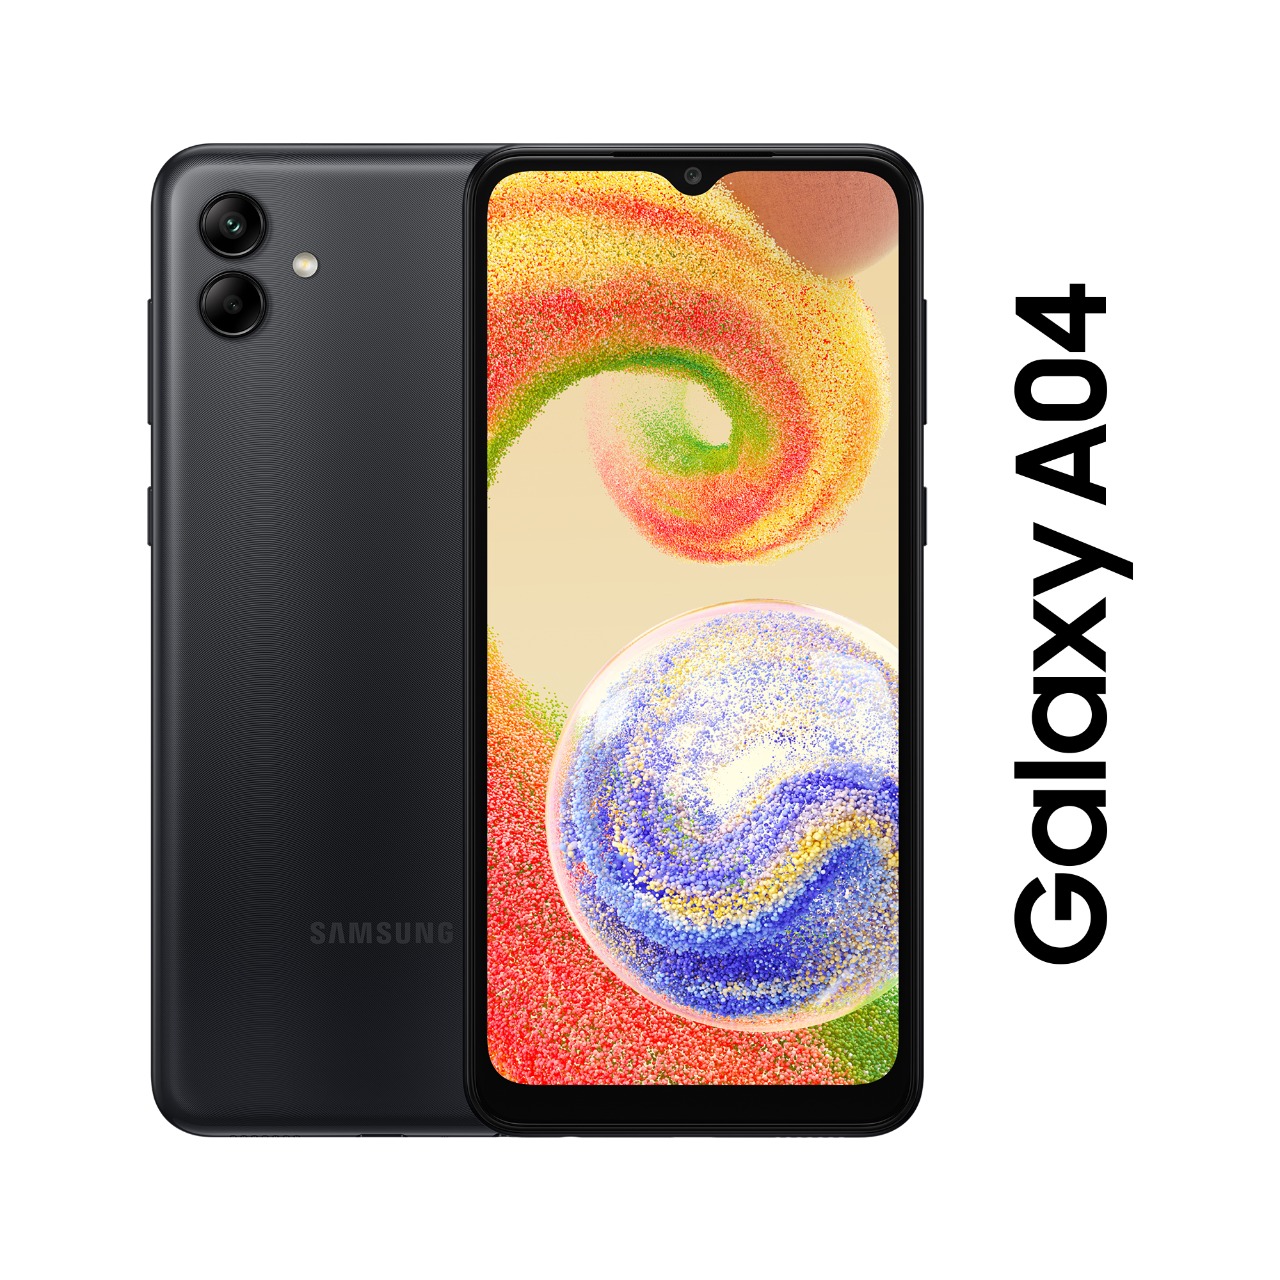 Samsung launches Galaxy A40 in Nepal - myRepublica - The New York Times  Partner, Latest news of Nepal in English, Latest News Articles